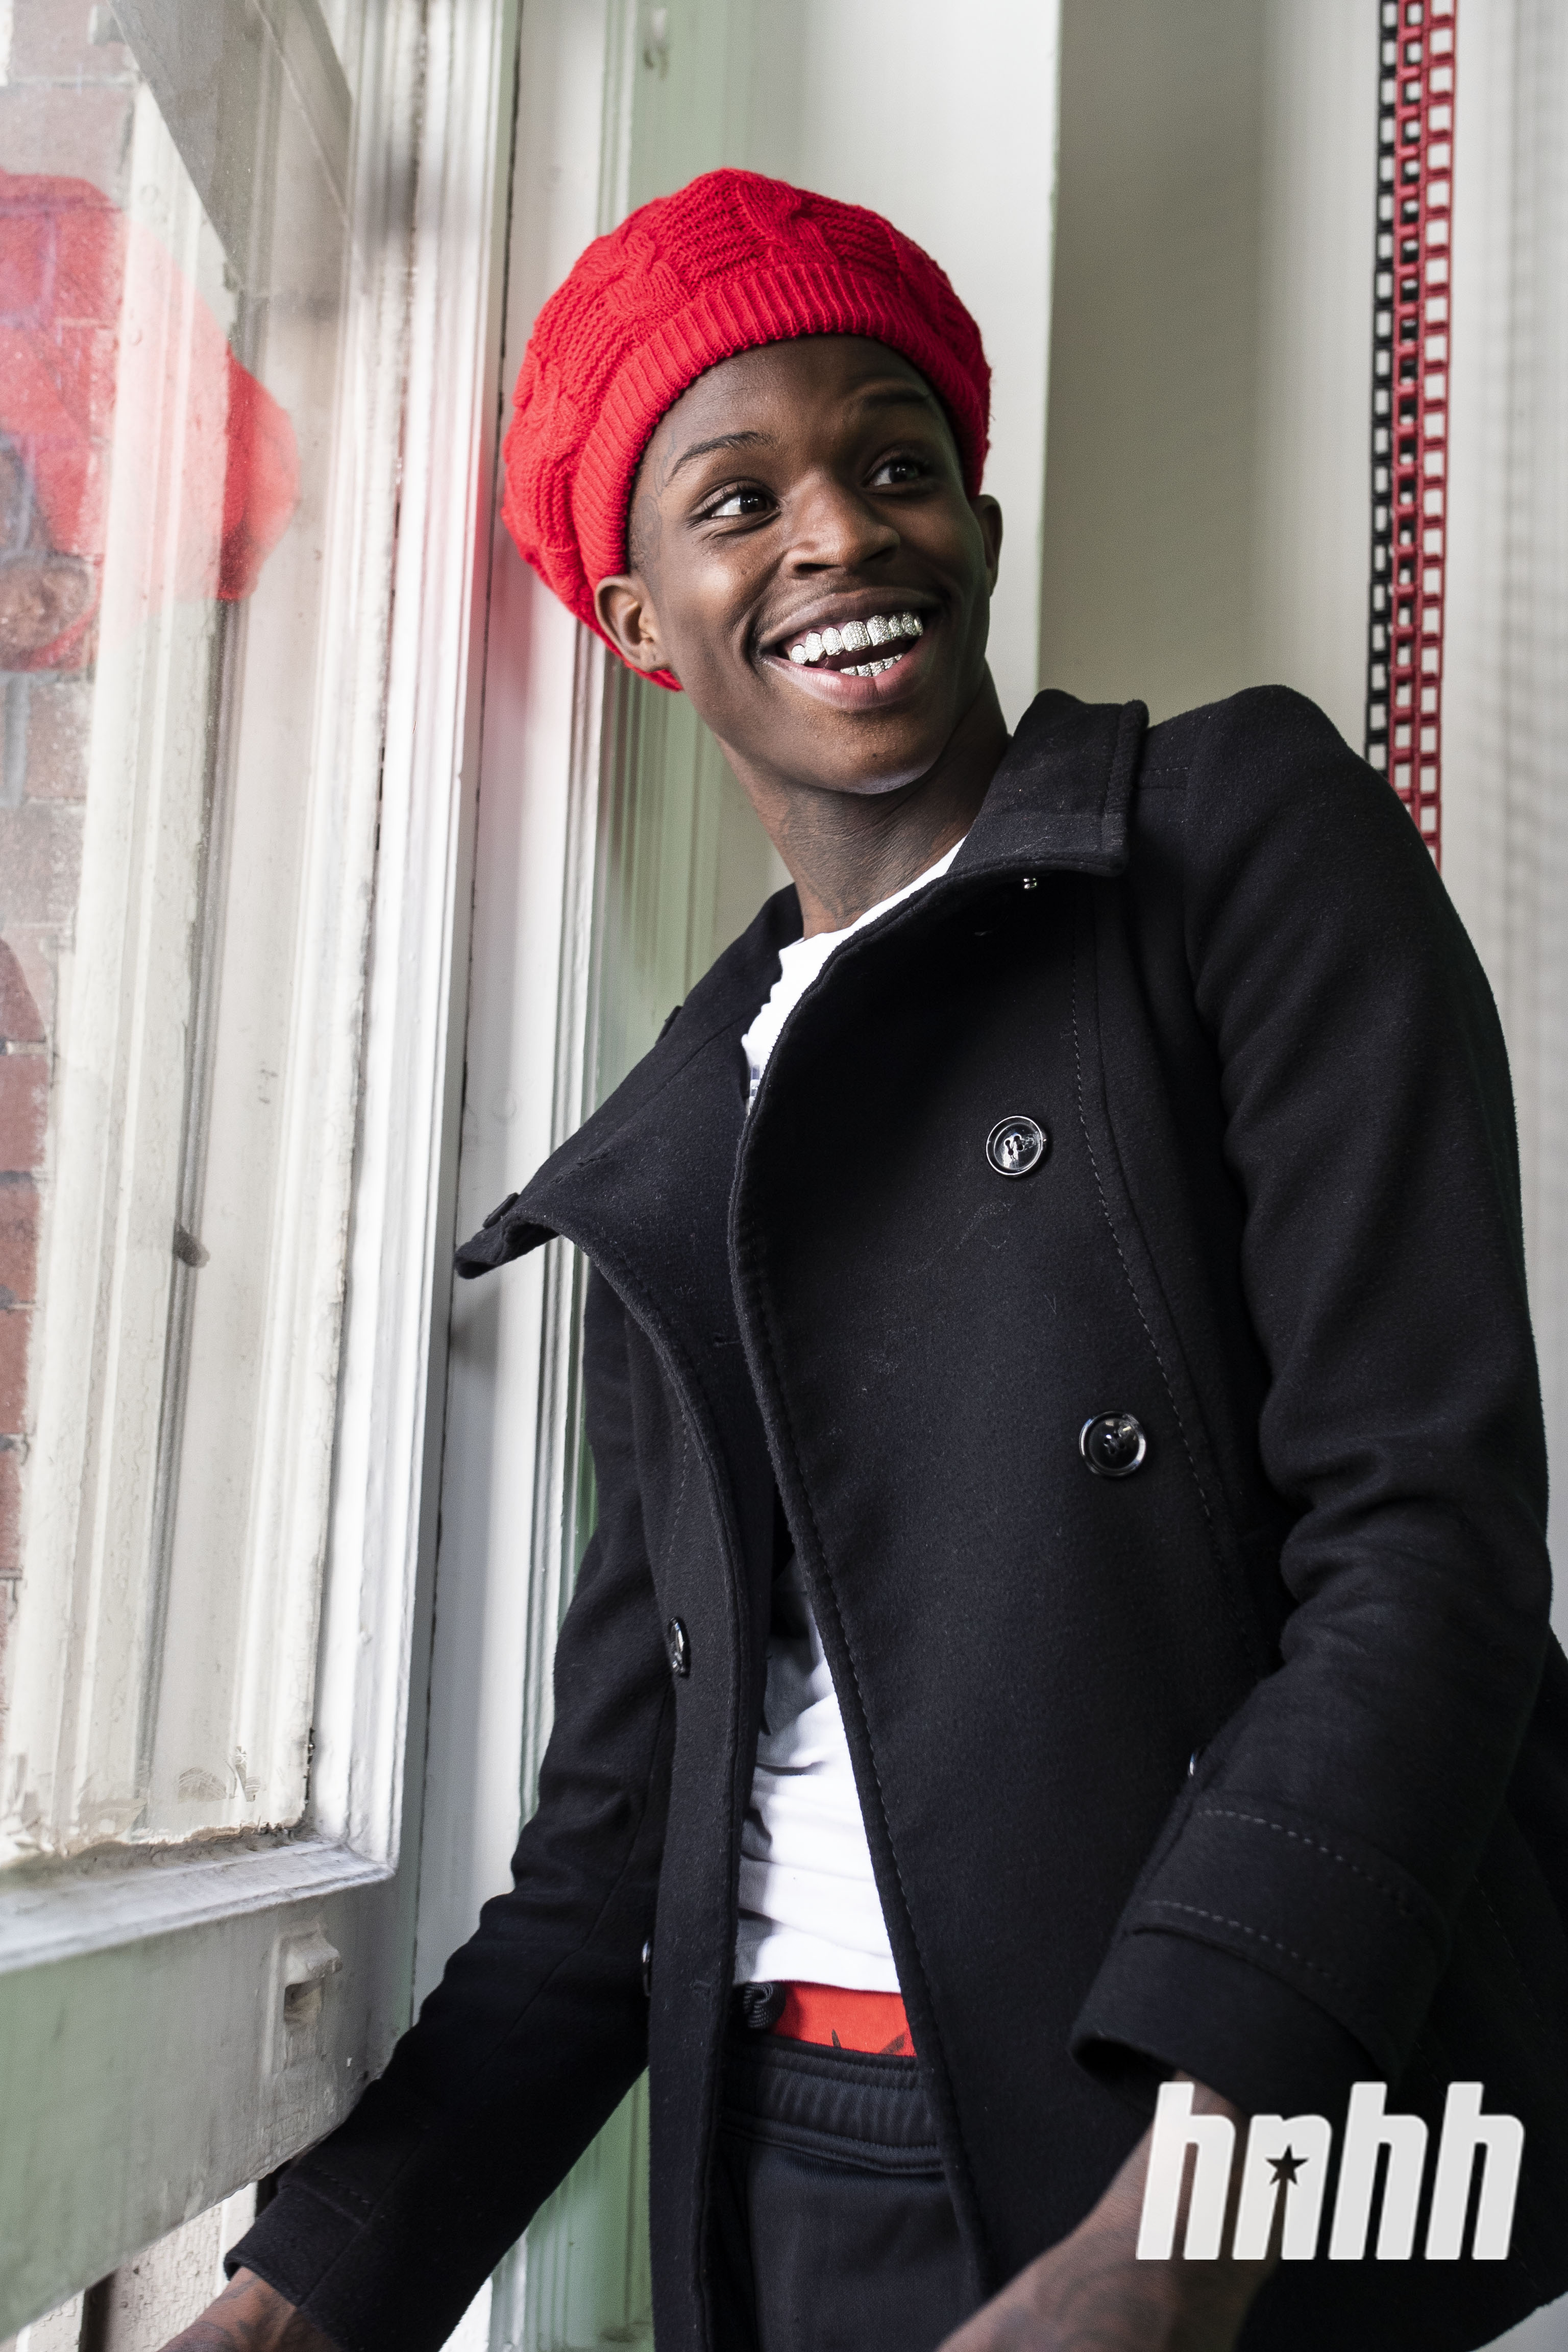 Quando Rondo Shares 'From the Neighborhood to the Stage' Project